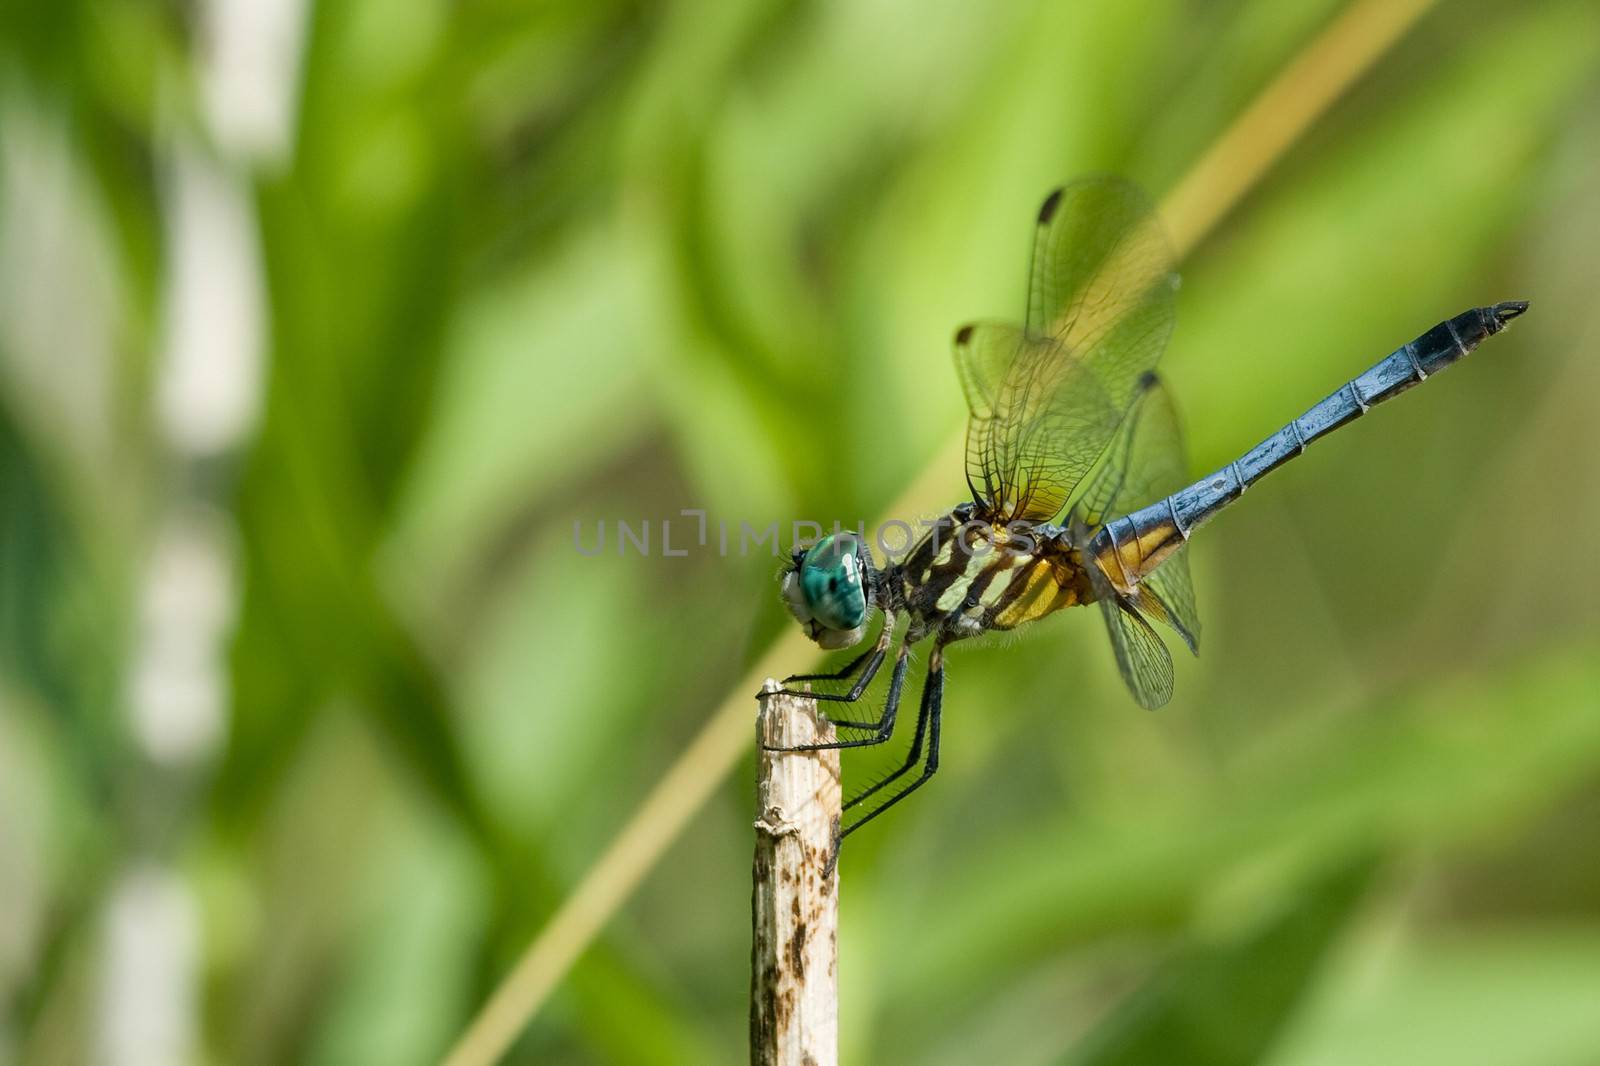 Close-up of a blue dragonfly